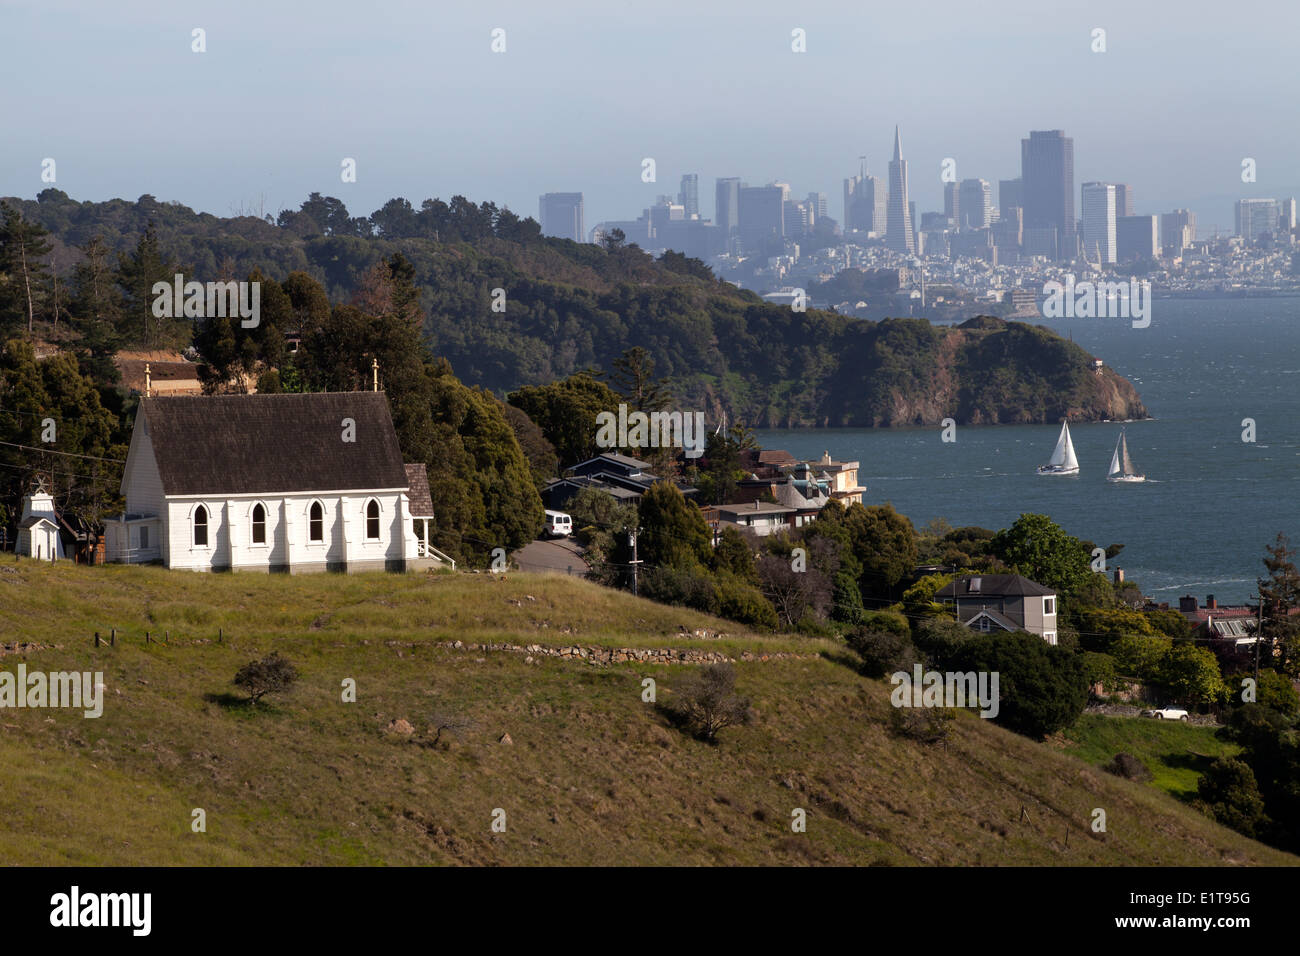 St. Hilary Church with San Francisco view in the background, Tiburon, California, USA. Stock Photo